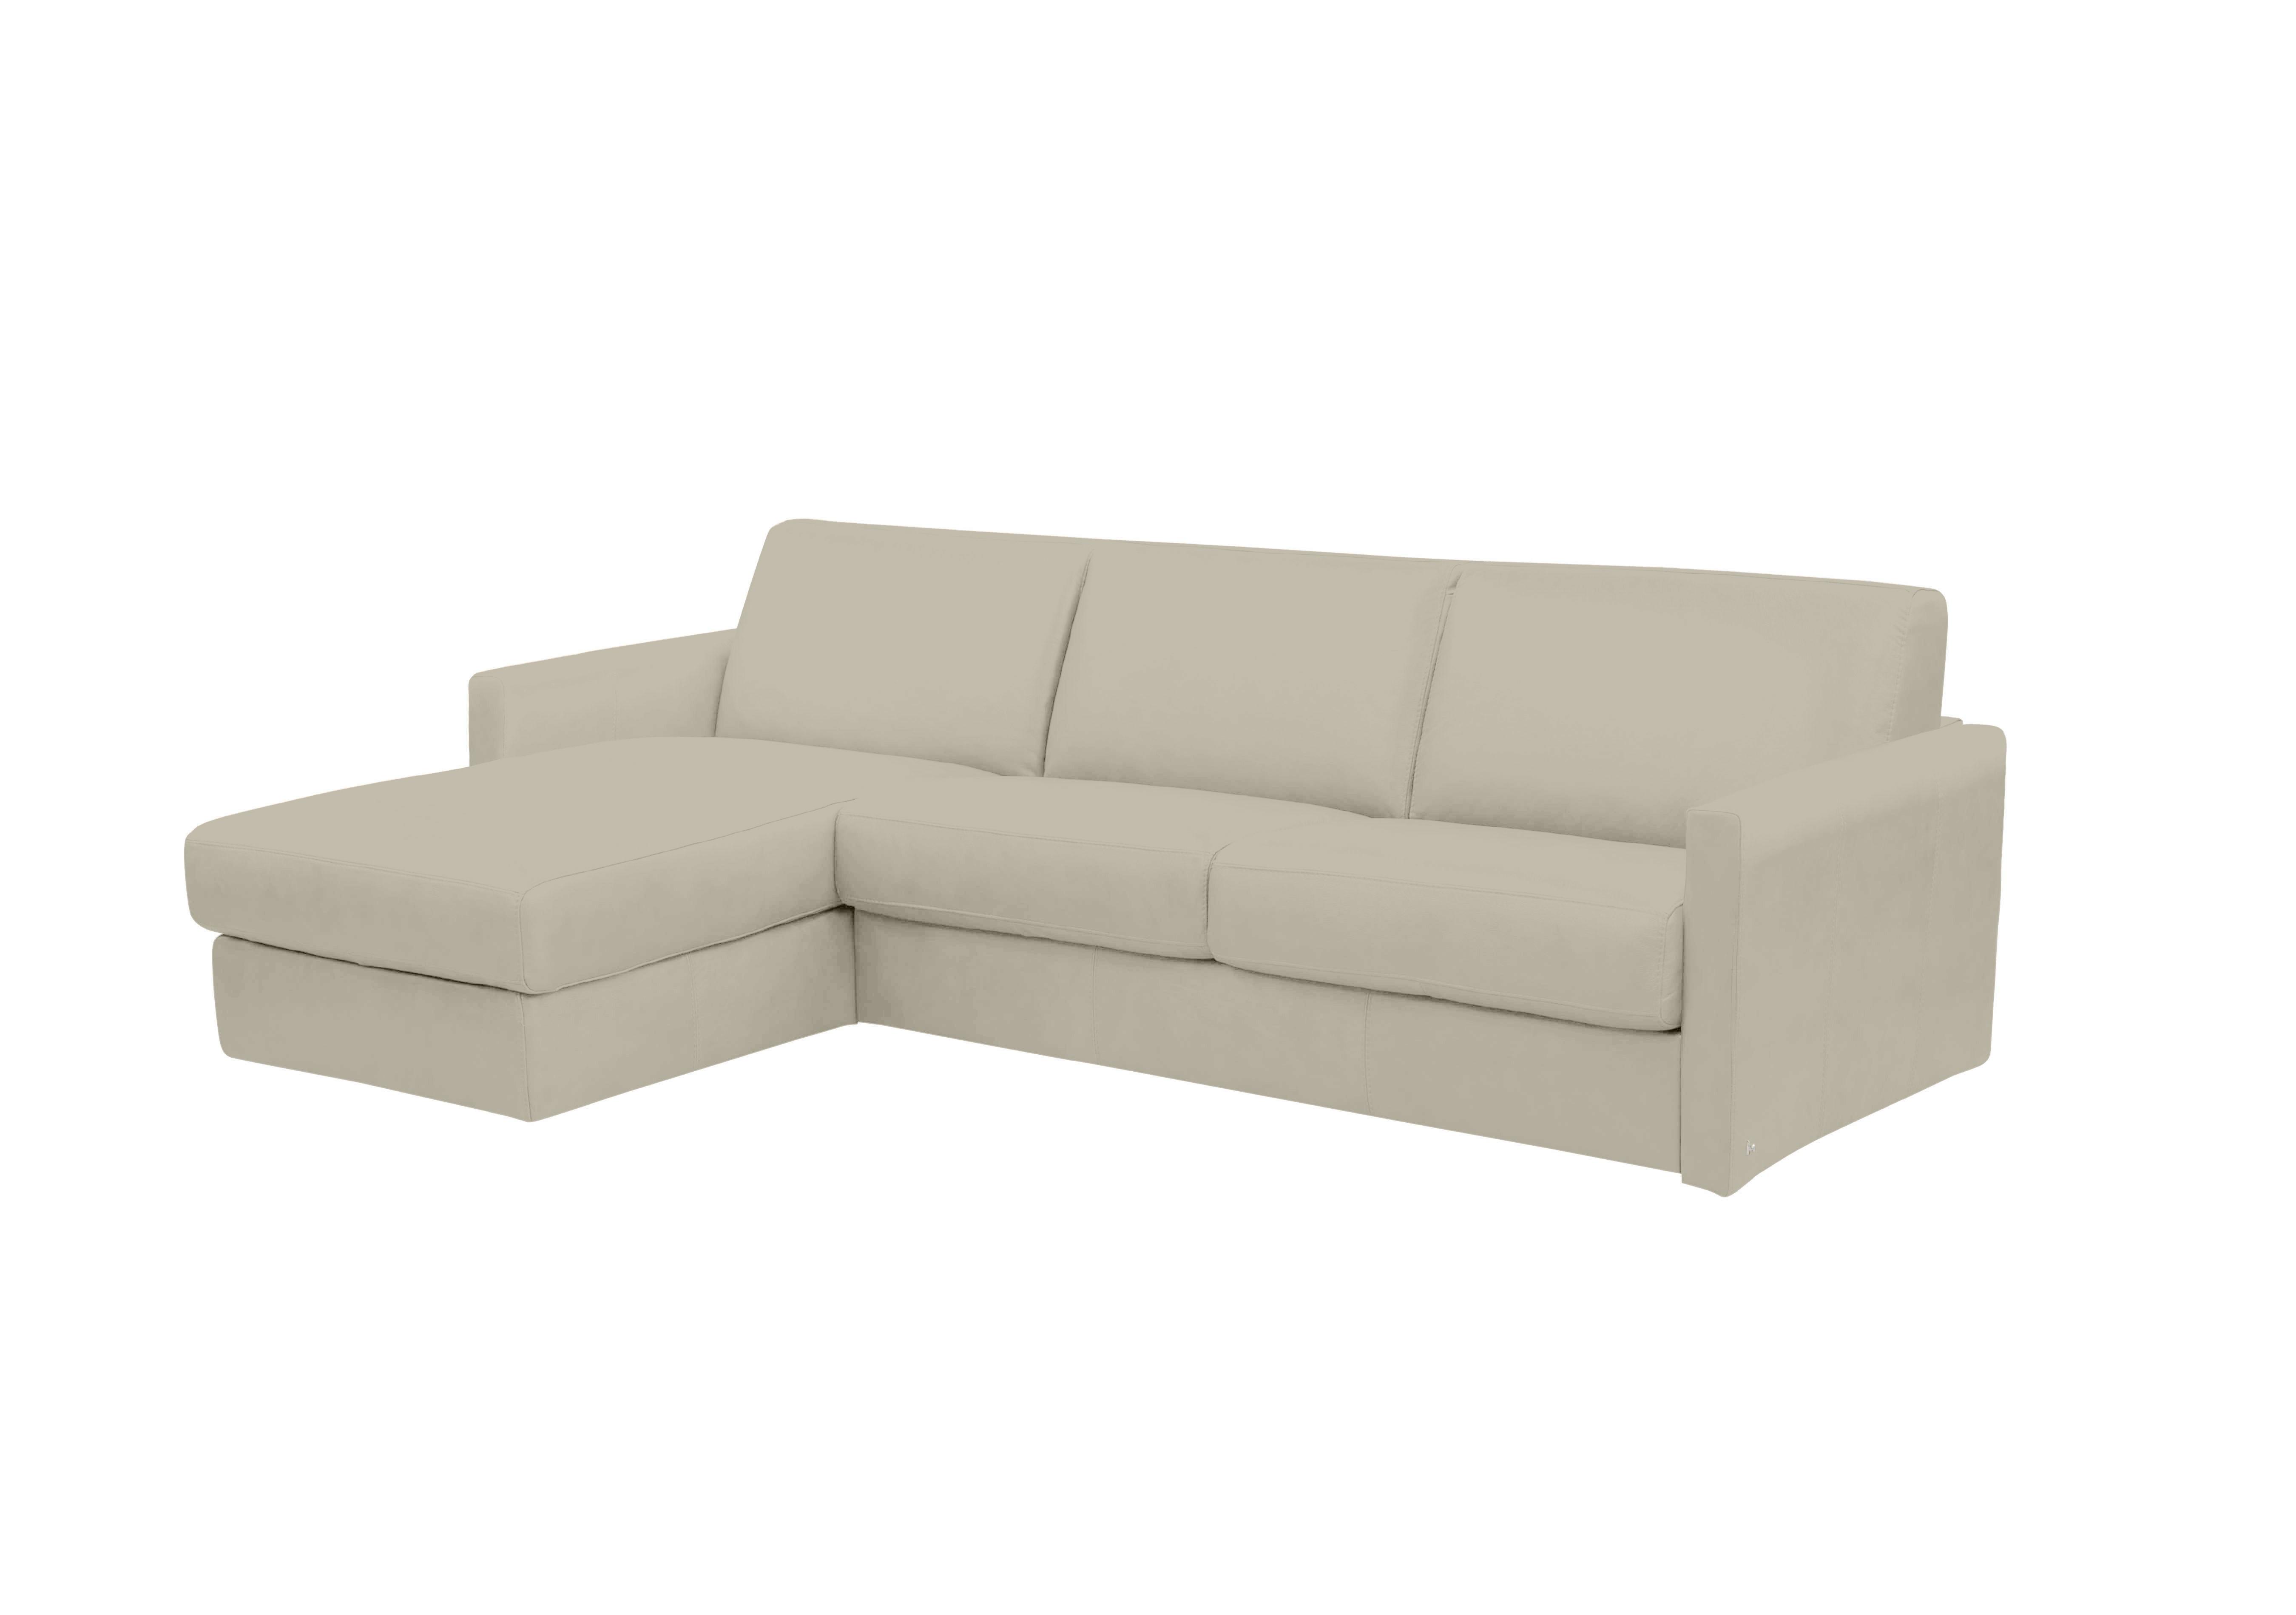 Alcova 3 Seater Leather Sofa Bed with Storage Chaise and Slim Arms in Torello Tortora 328 on Furniture Village